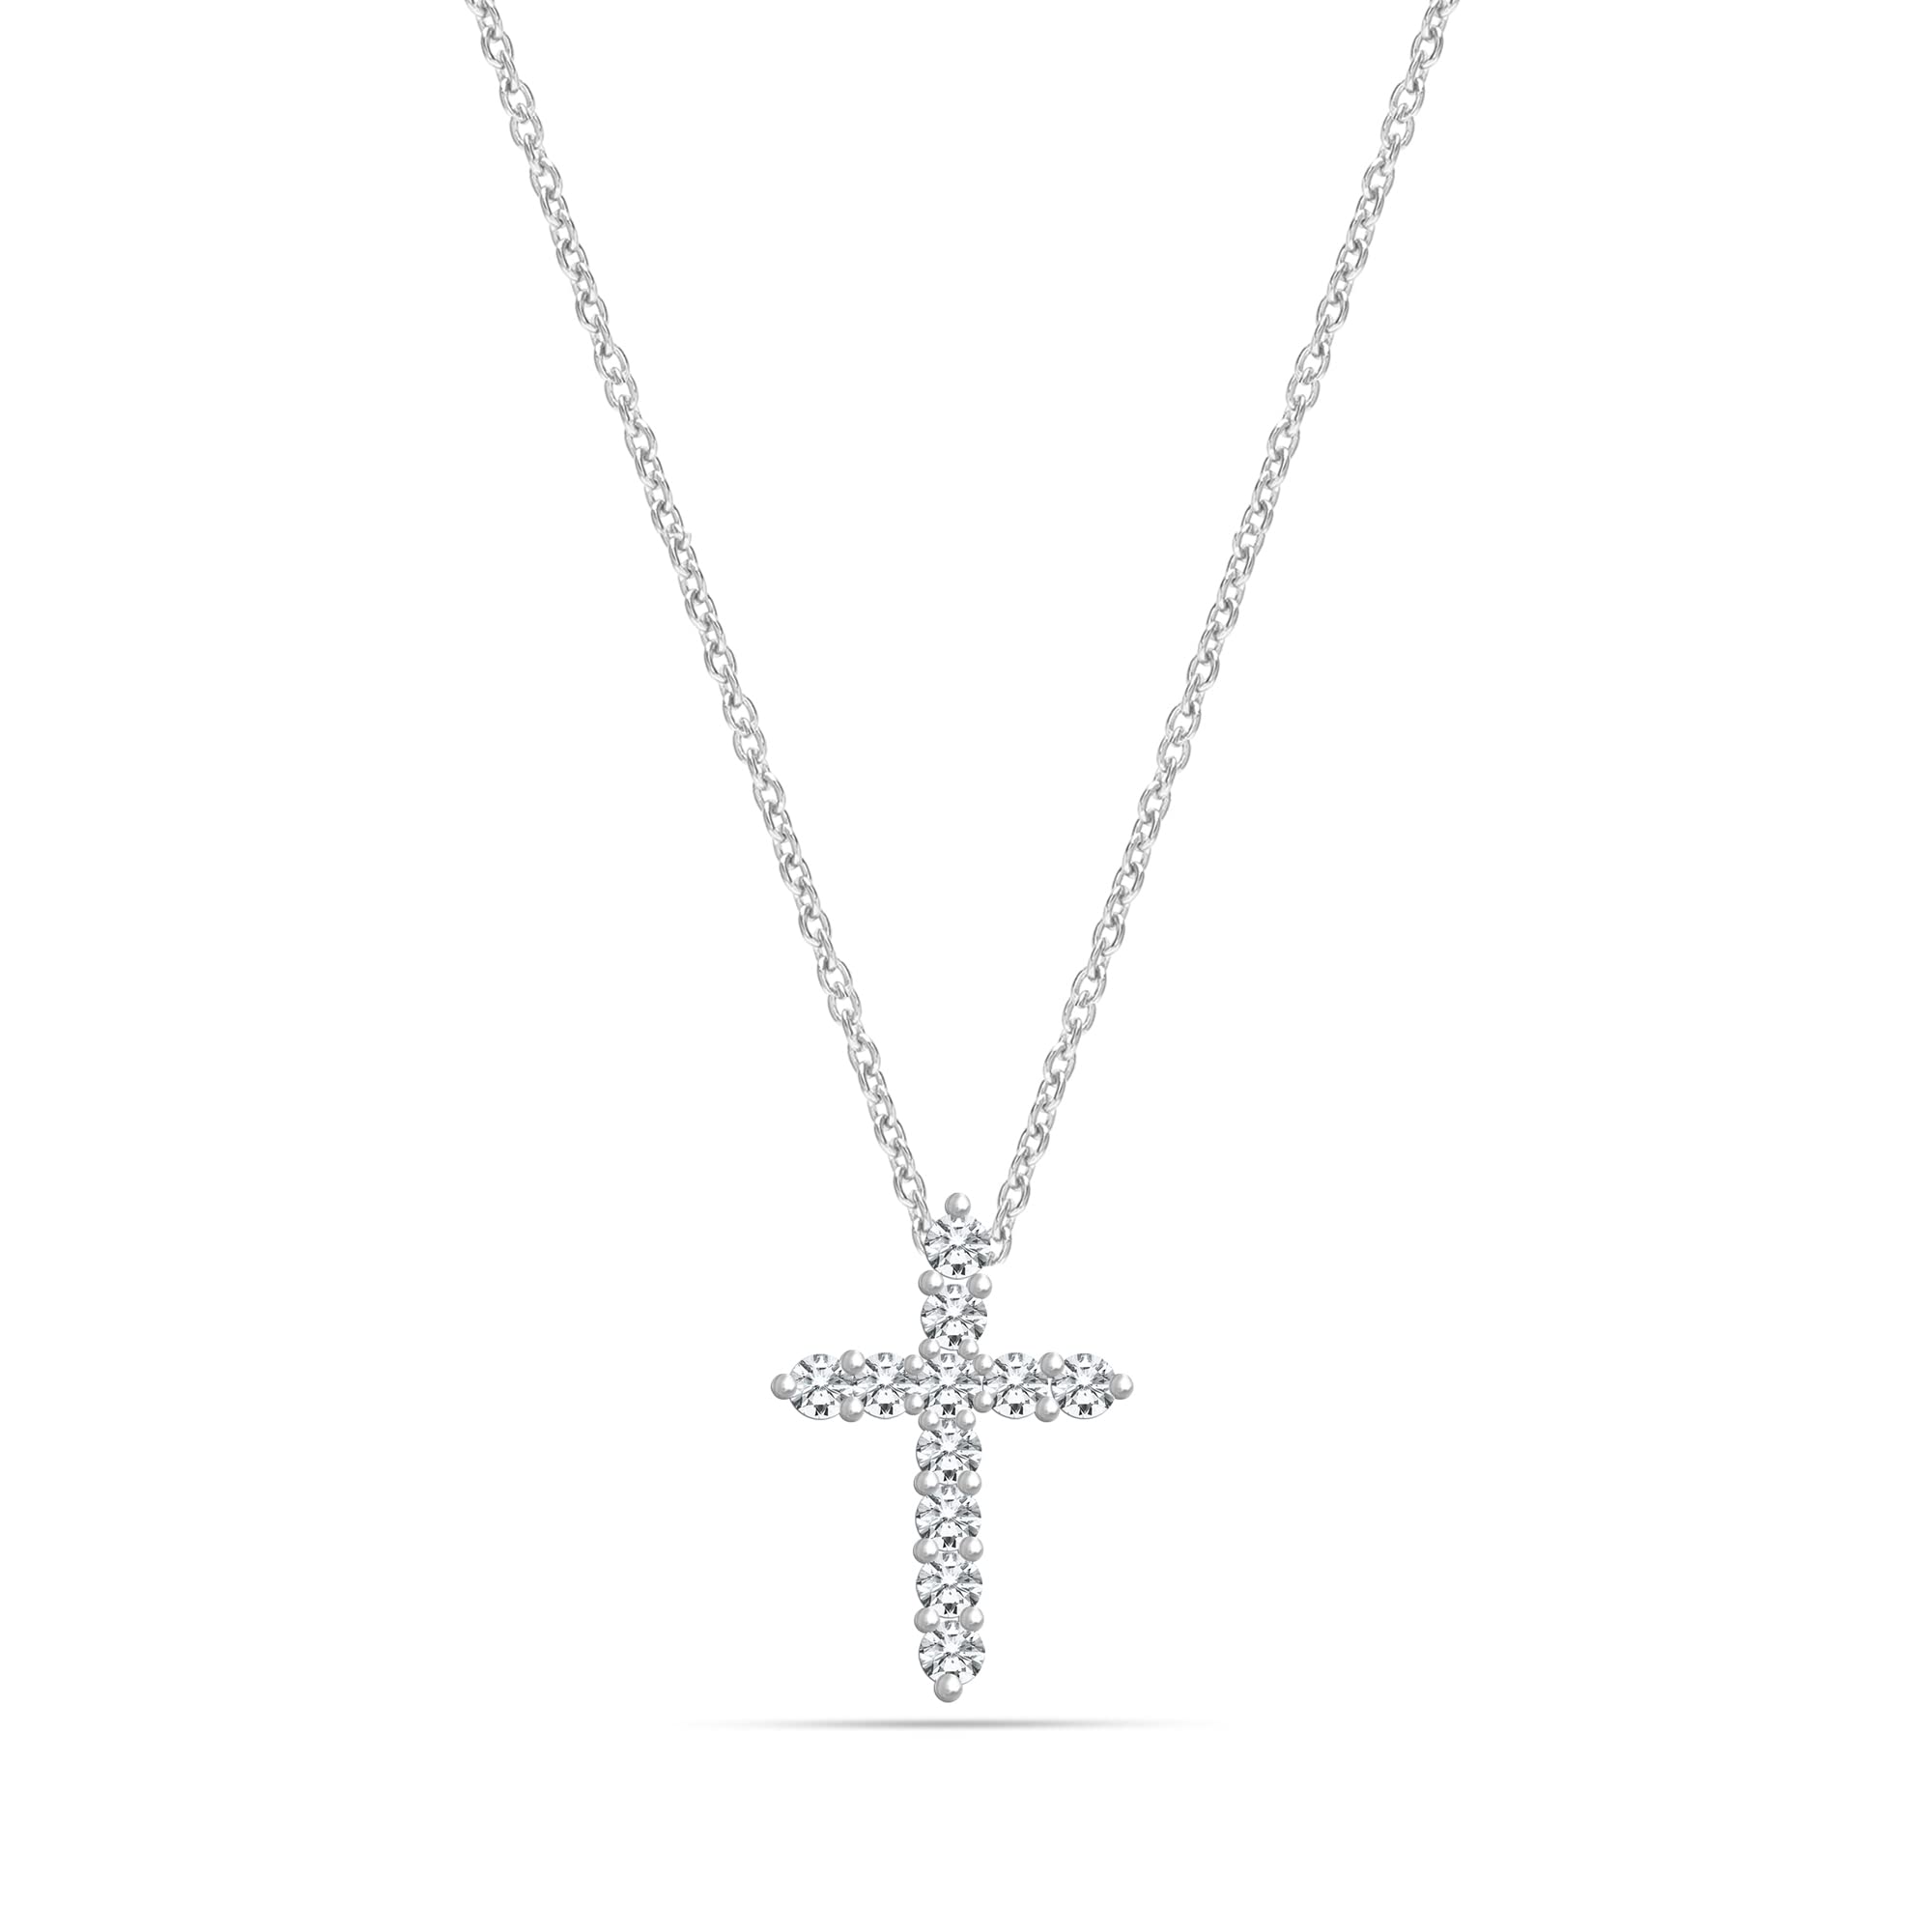 925 Sterling Silver Cubic Zirconia Cross Charm Pendant Necklace for Women Teen